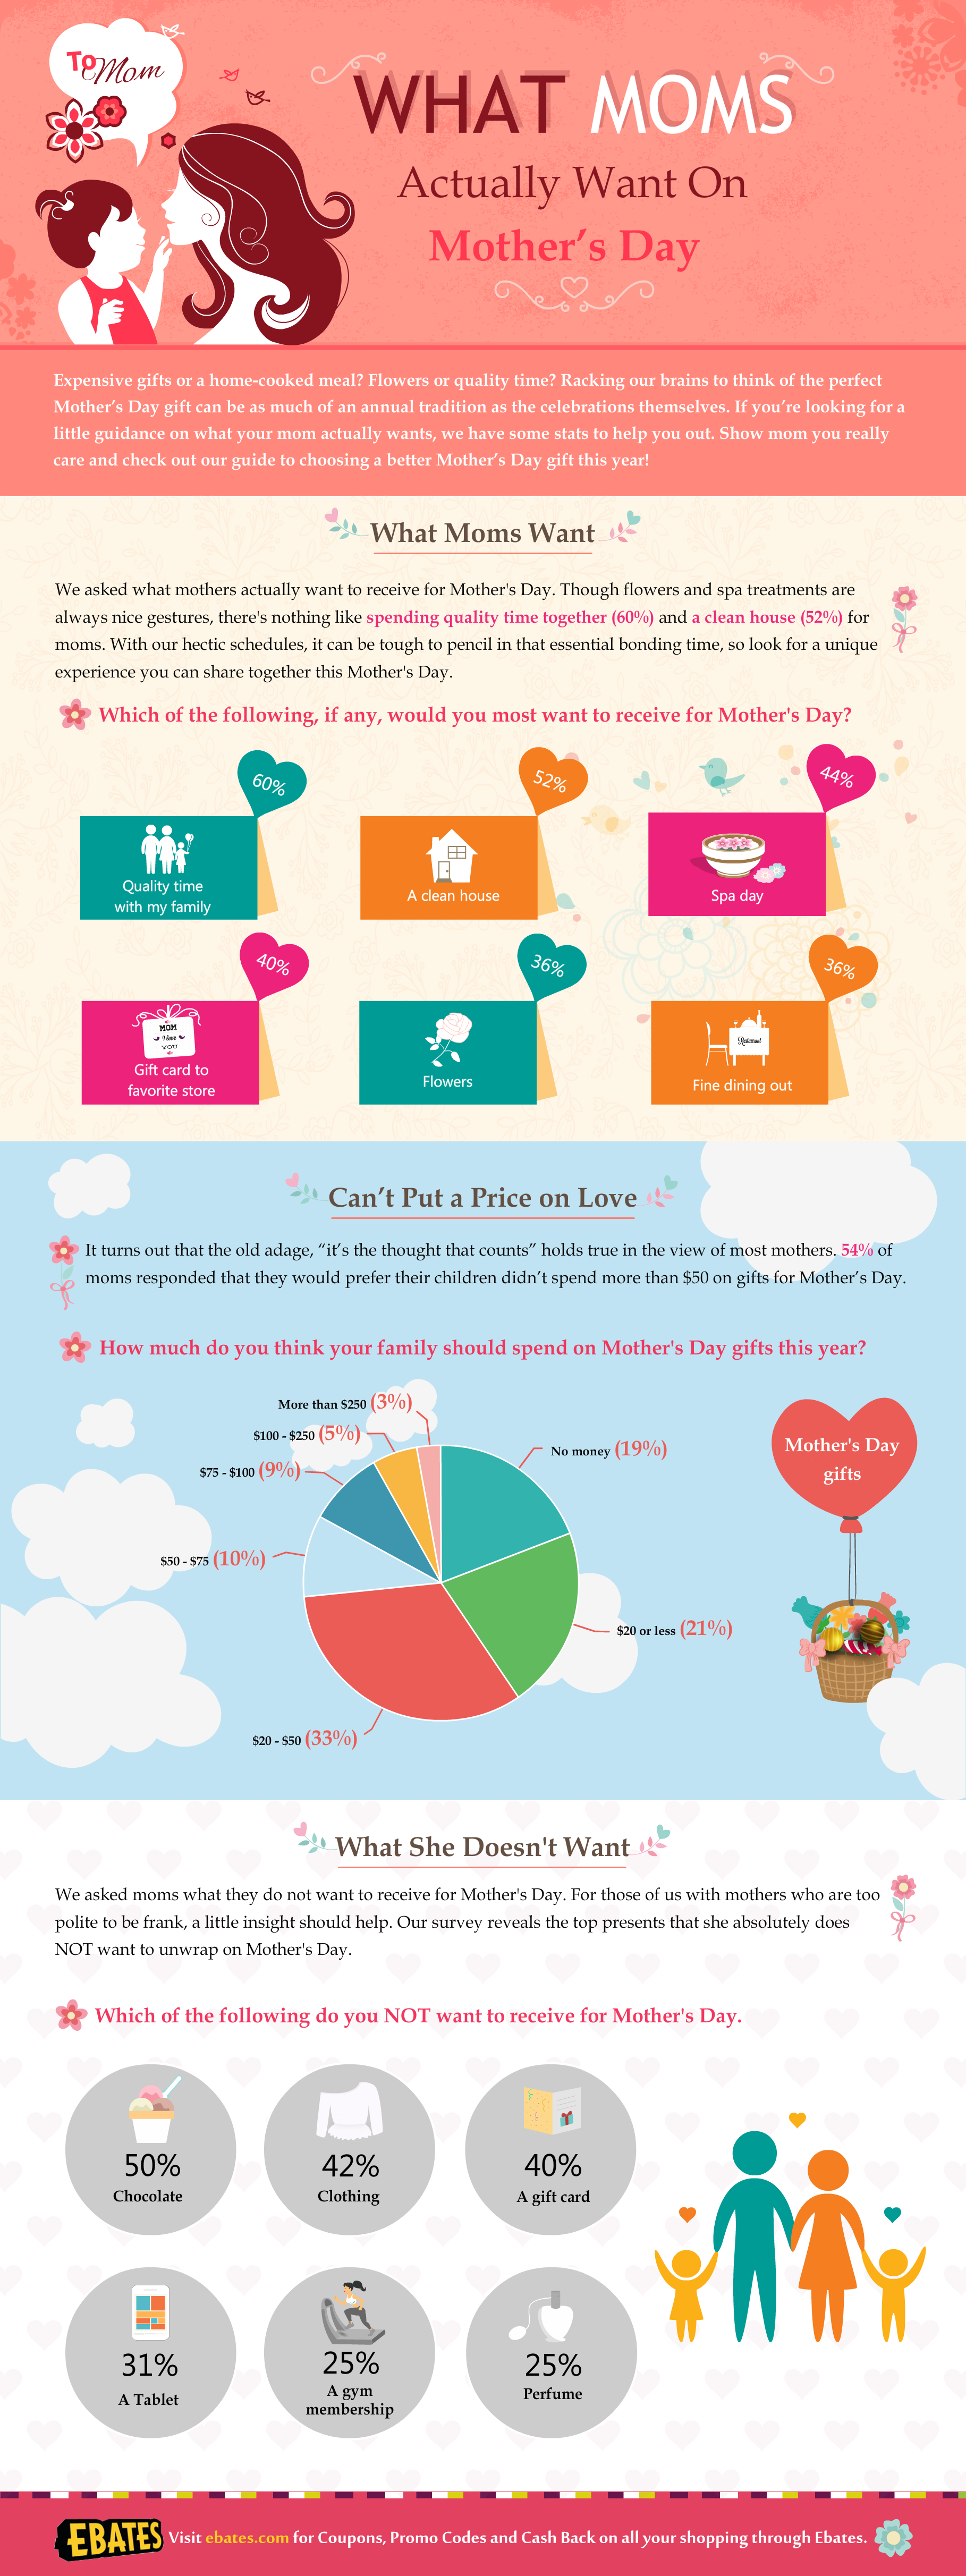 Ebates Mother’s Day Gifts Infographic